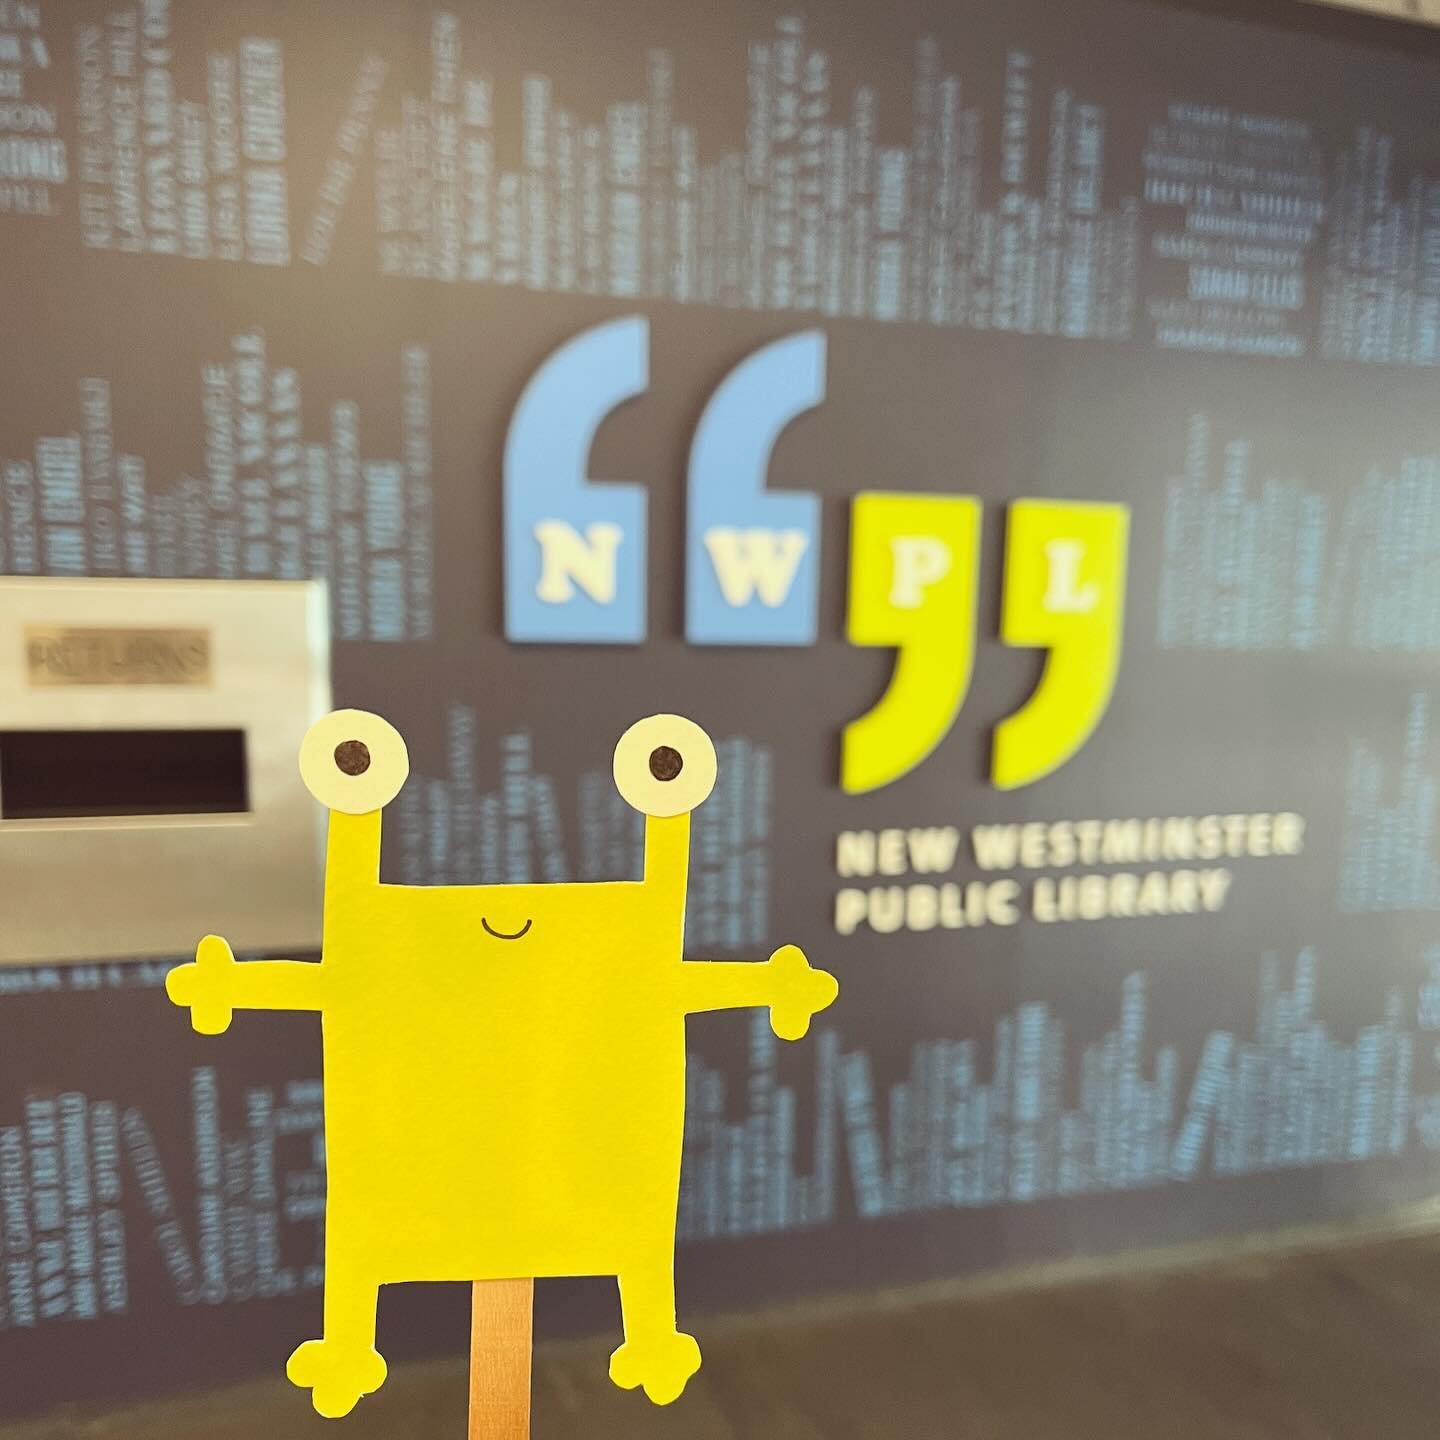 Where&rsquo;s Frank now? He&rsquo;s in New Westminster, visiting the Main Library for the very first Bridges Literary Festival! Many thanks to @nwplibrary for having us 🤍

@tilburyhousepublishers 
#bridgesliteraryfestival2024 
#kidsbooksaboutdiversi